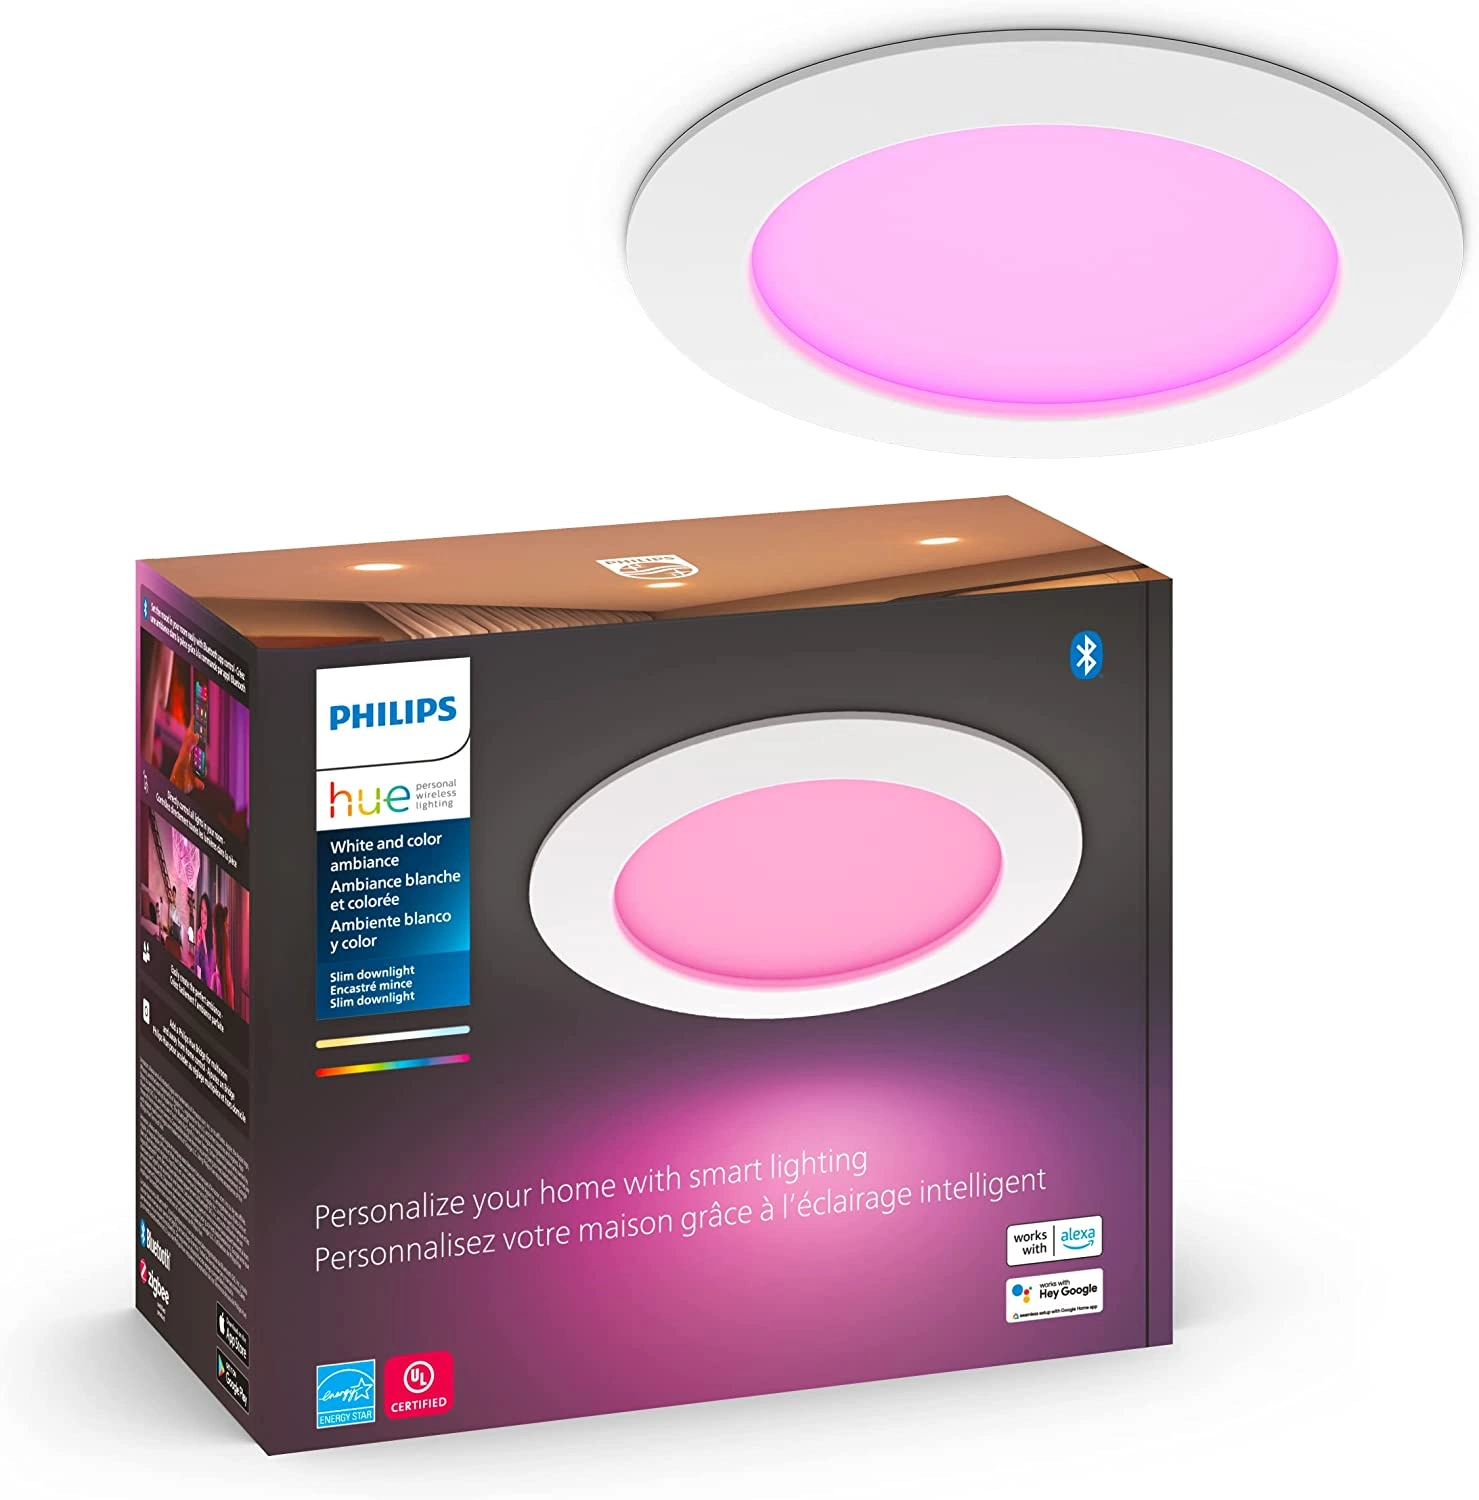 Hue White and Color Ambiance Slim Downlight 5/6 inch